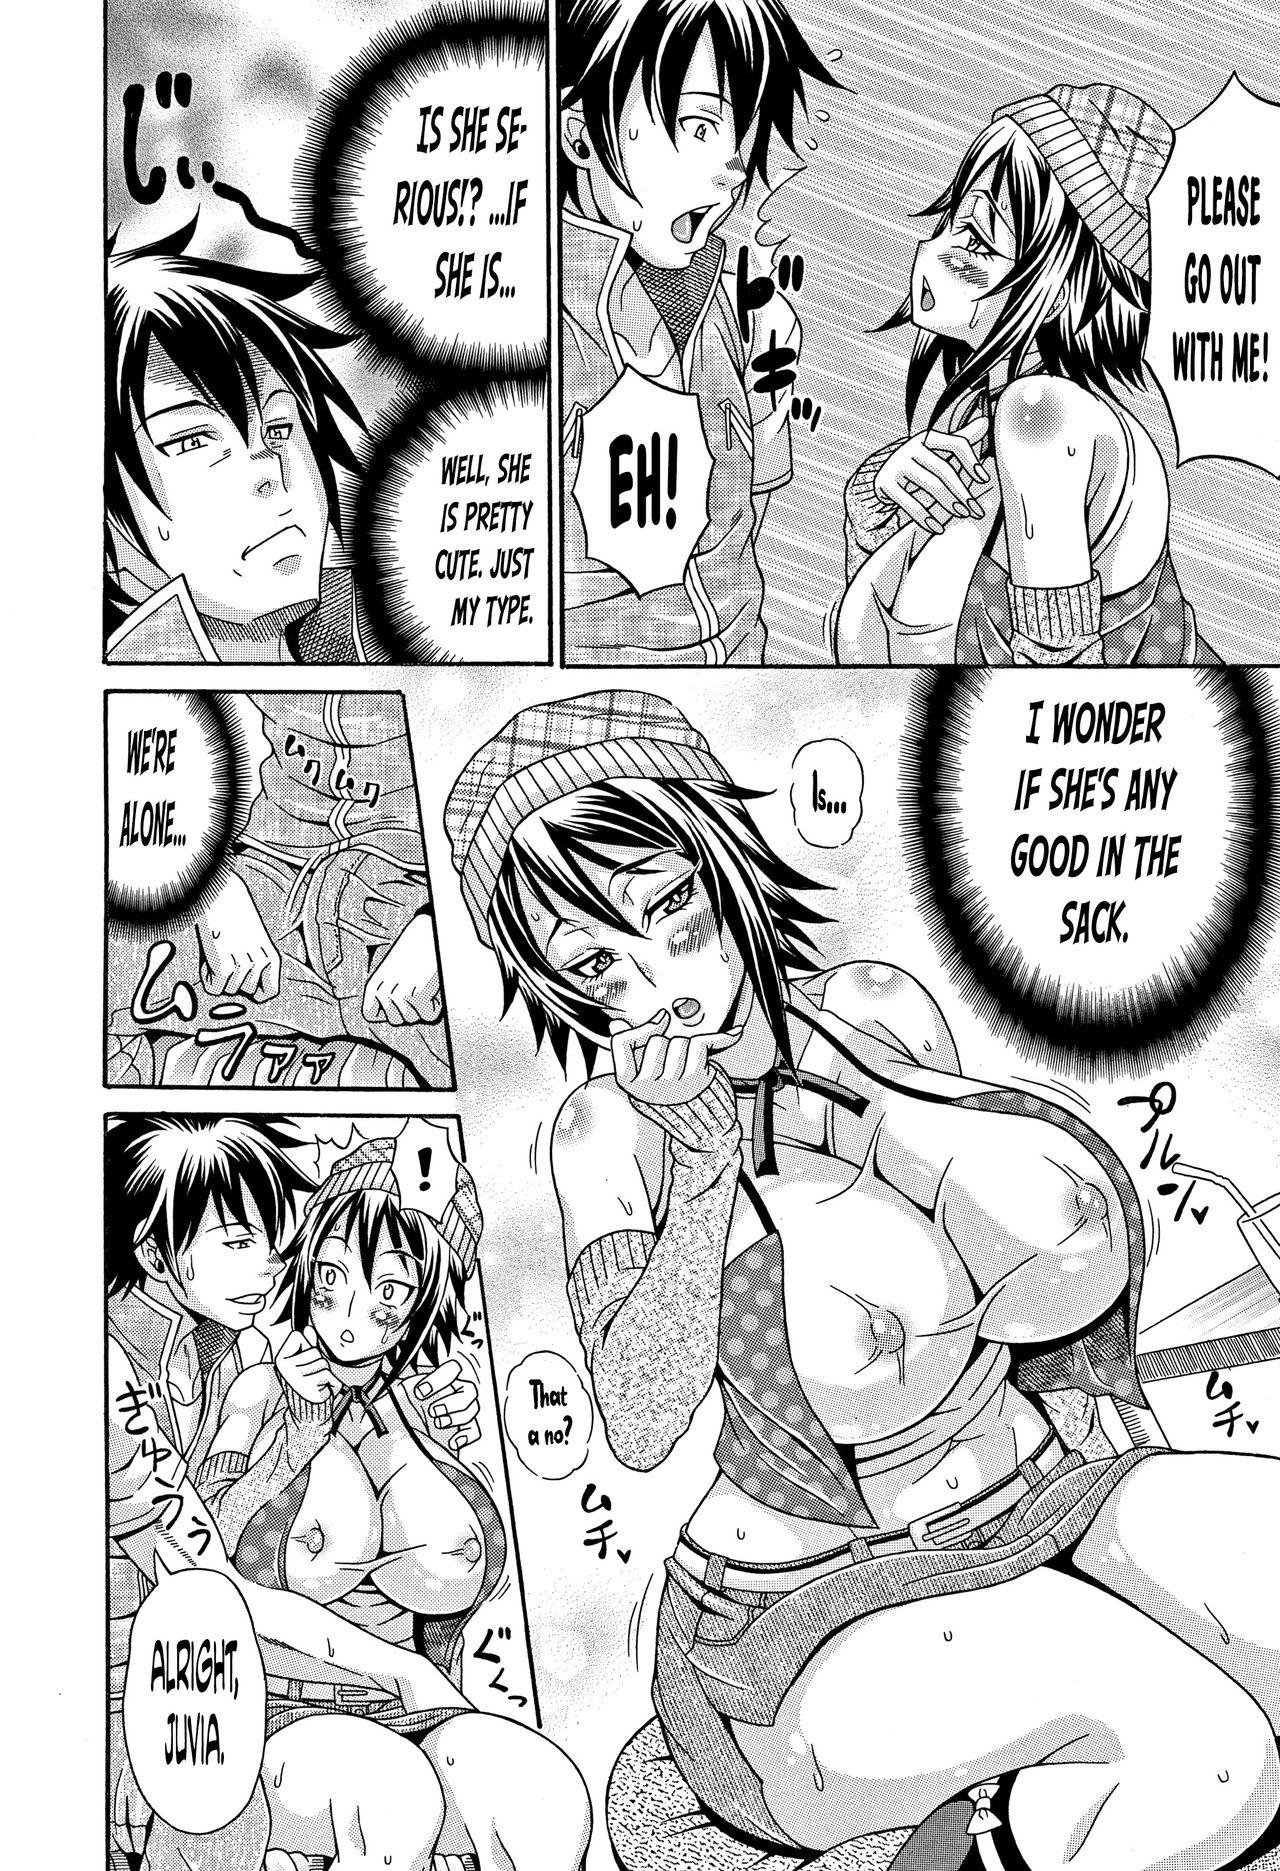 [Andou Hiroyuki] Mamire Chichi - Sticky Tits Feel Hot All Over. Ch.1-9 [English] [doujin-moe.us] 58